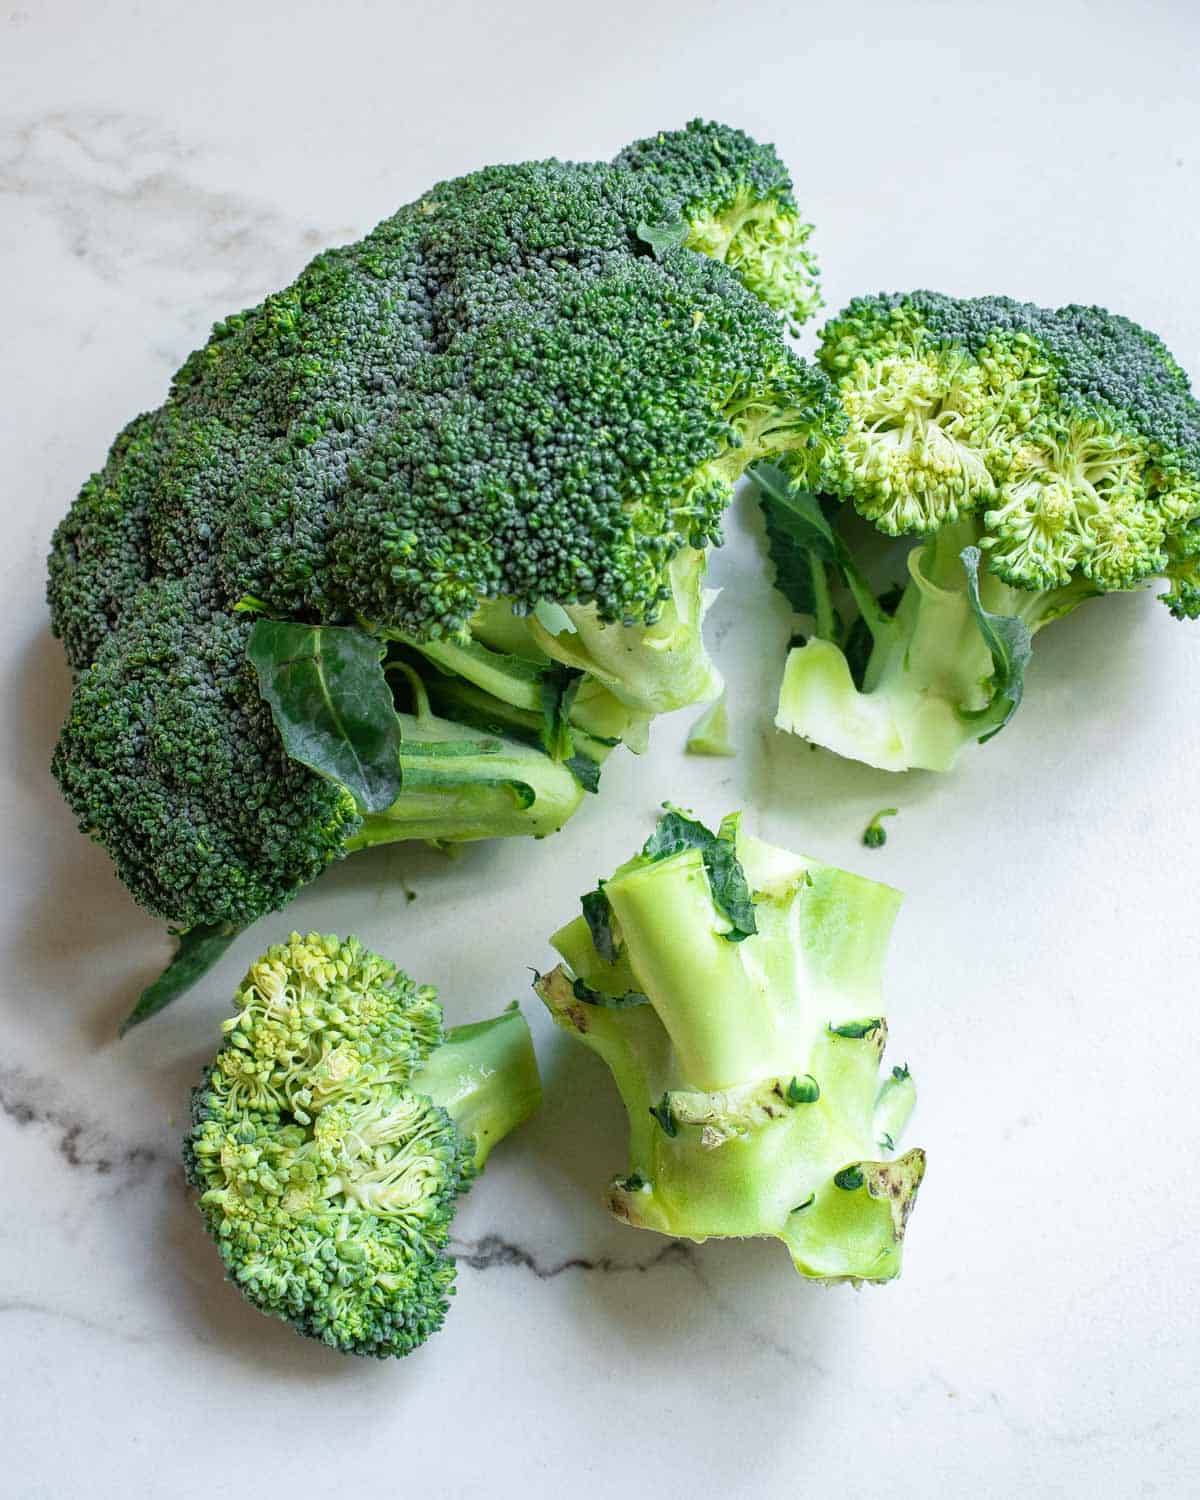 A head of broccoli with large florets broken off.